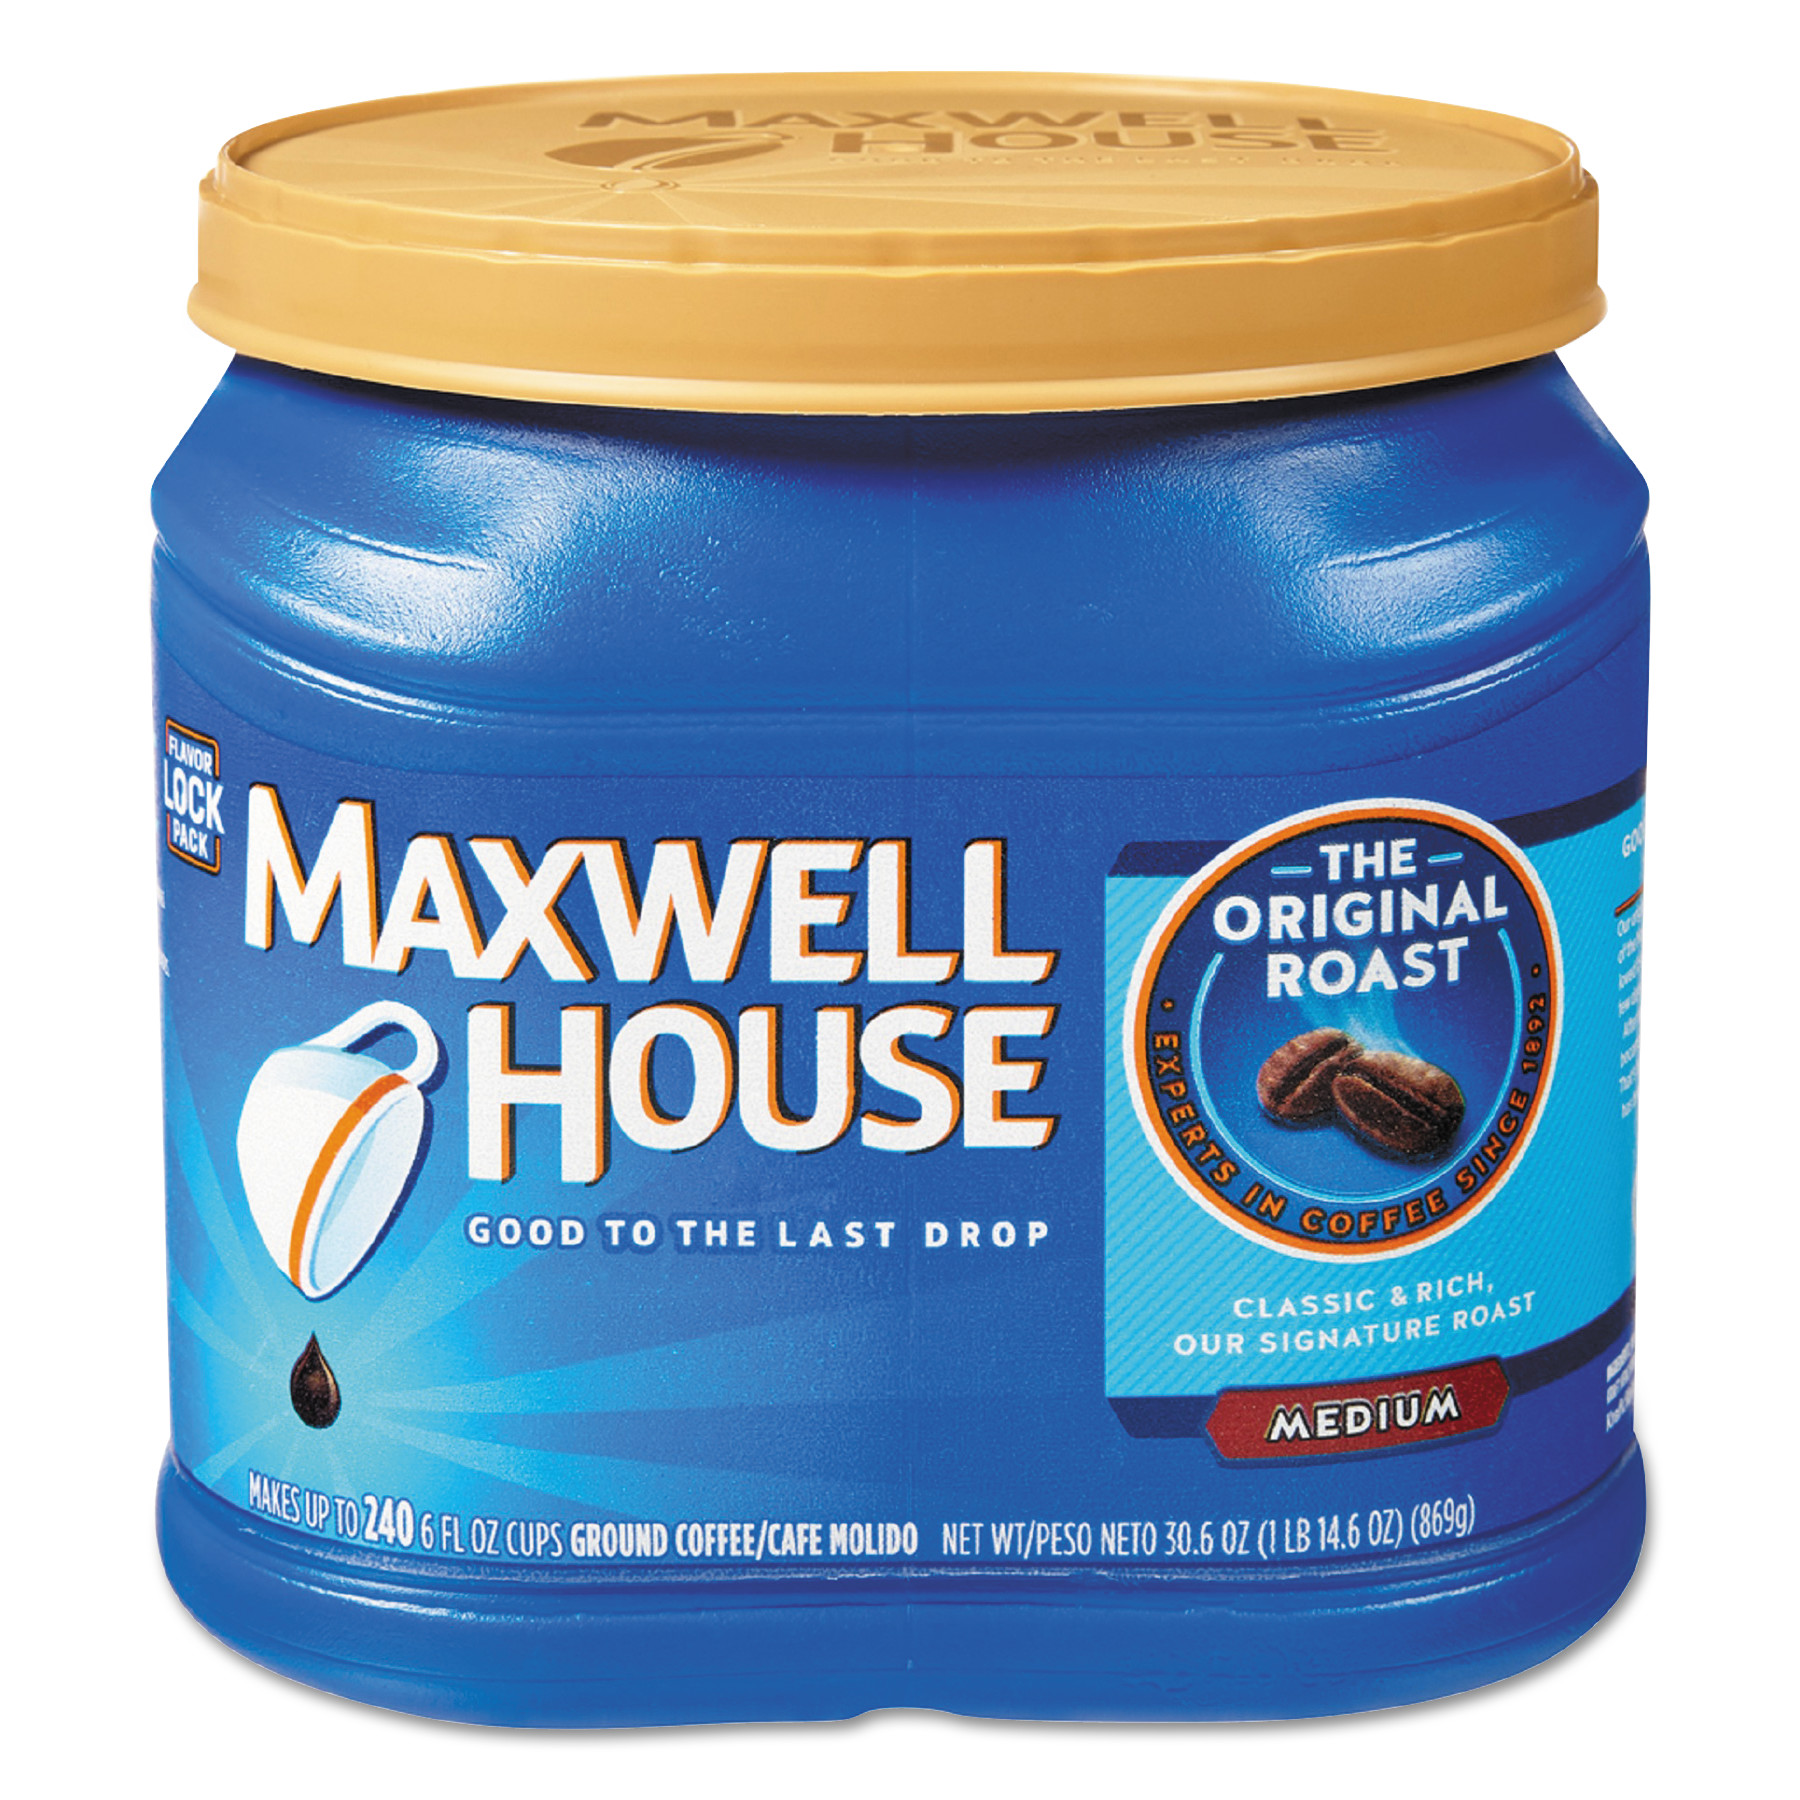  Maxwell House GEN04648 Coffee, Regular Ground, 30.6 oz Canister (MWH04648) 